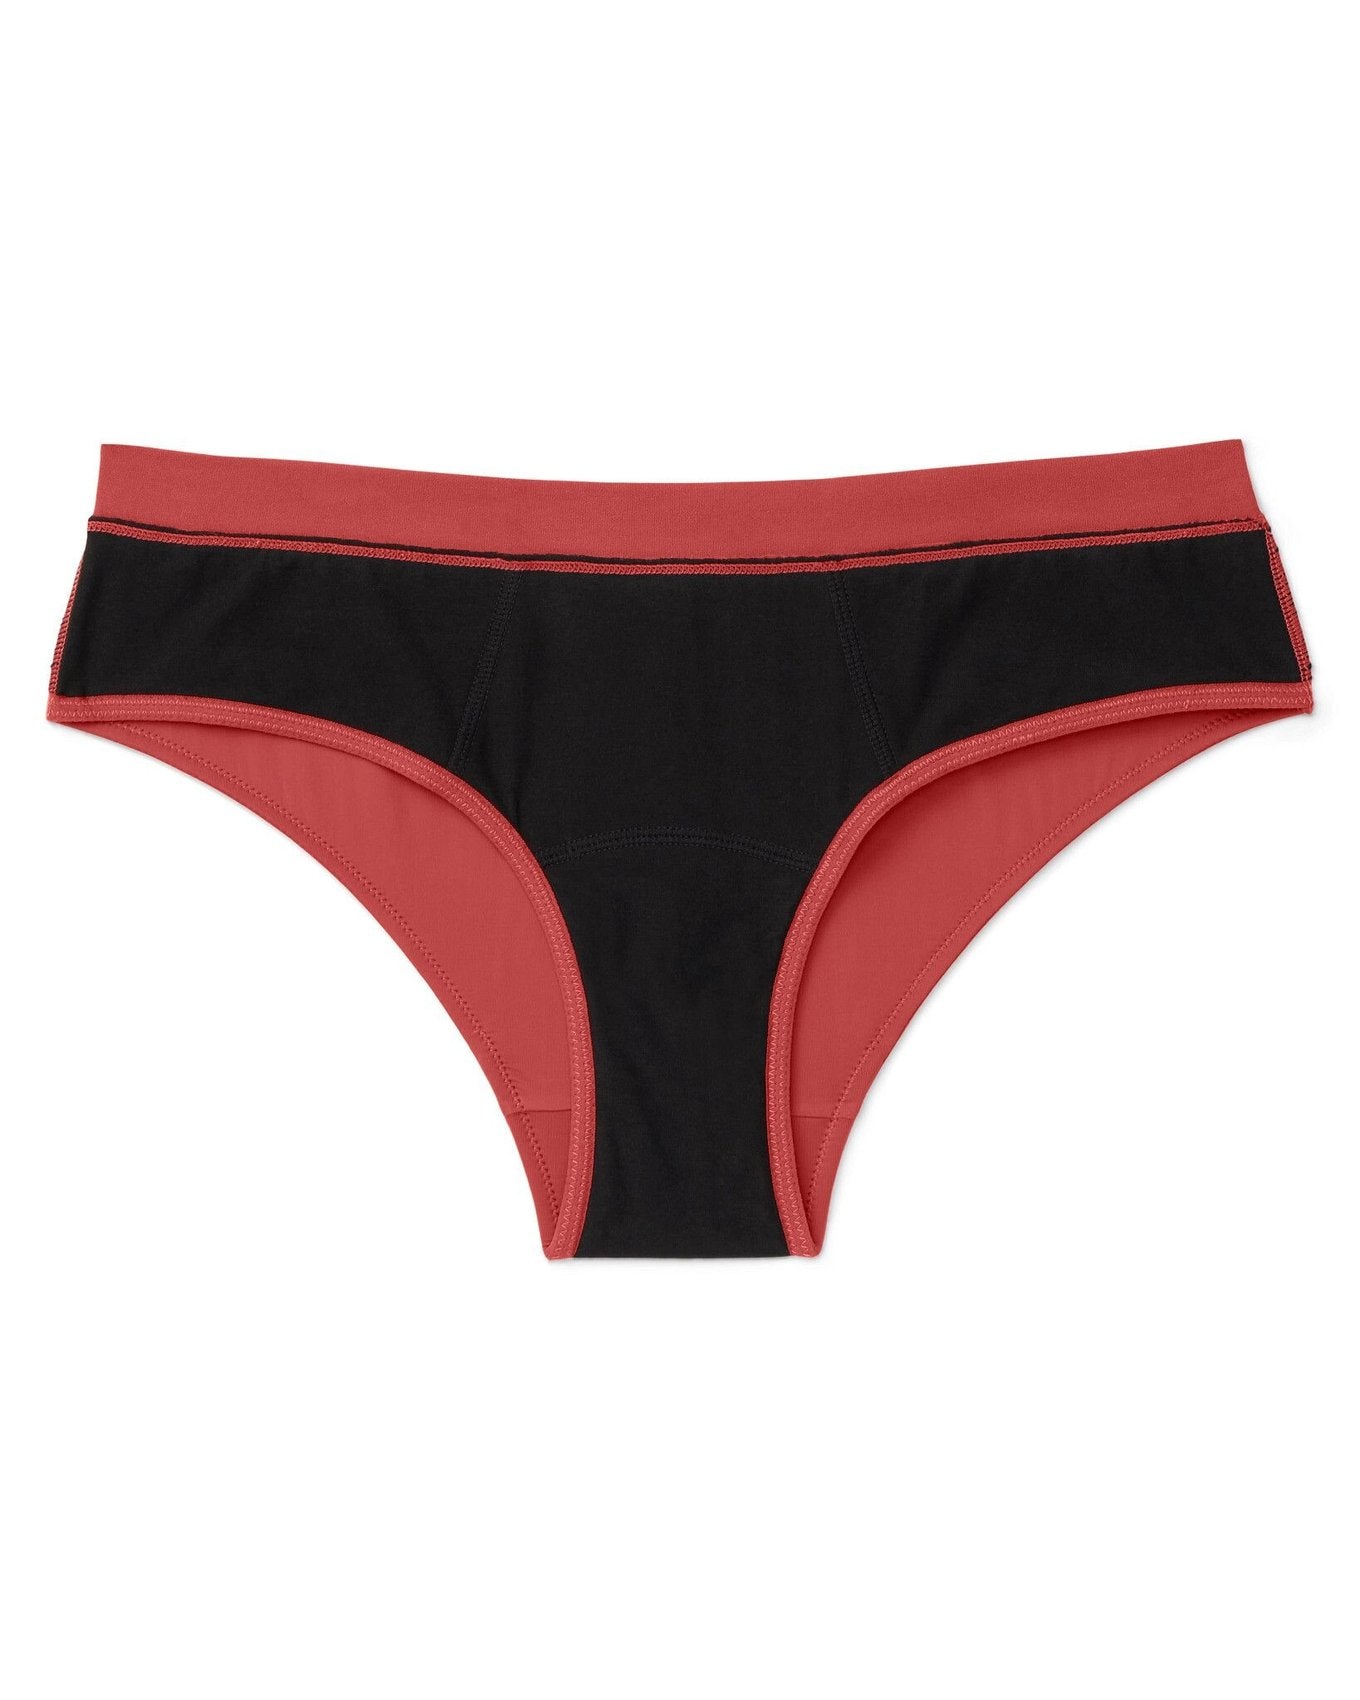 Joyja Cindy period-proof panty in color Baked Apple and shape cheeky